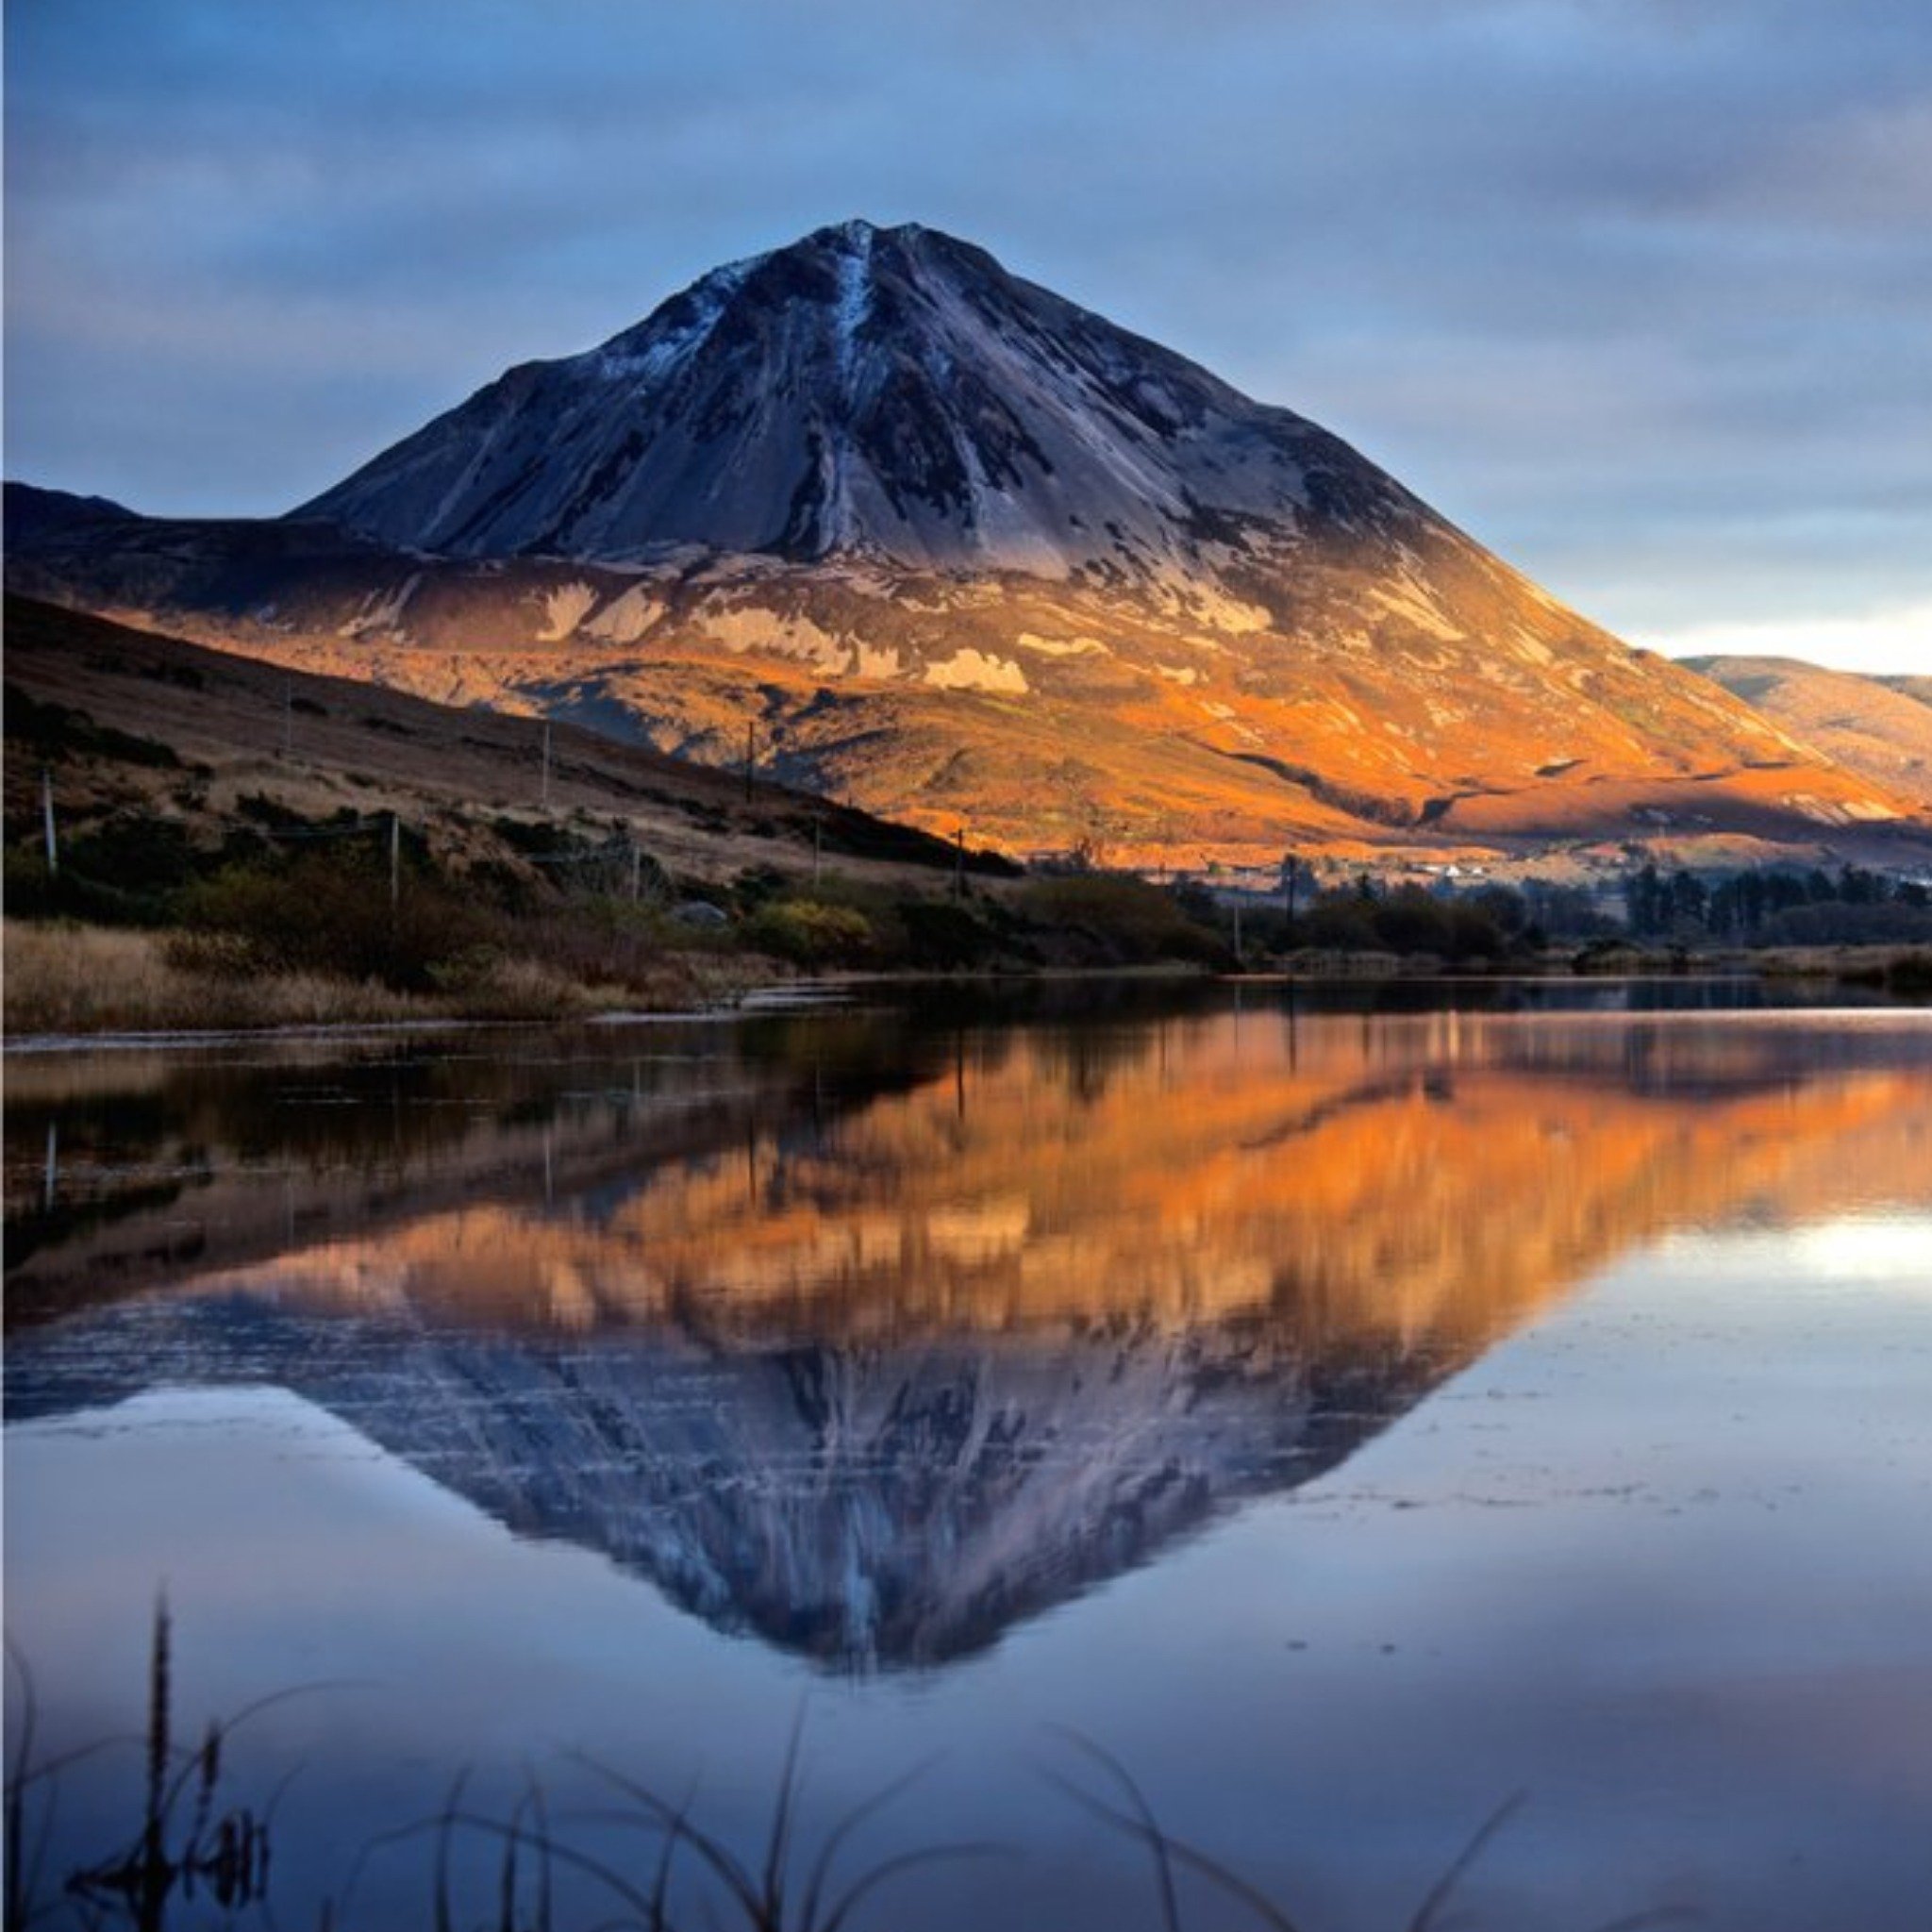 Moonpig Photographic Image Of The Errigal Mountain In Donegal, Ireland Card, Large